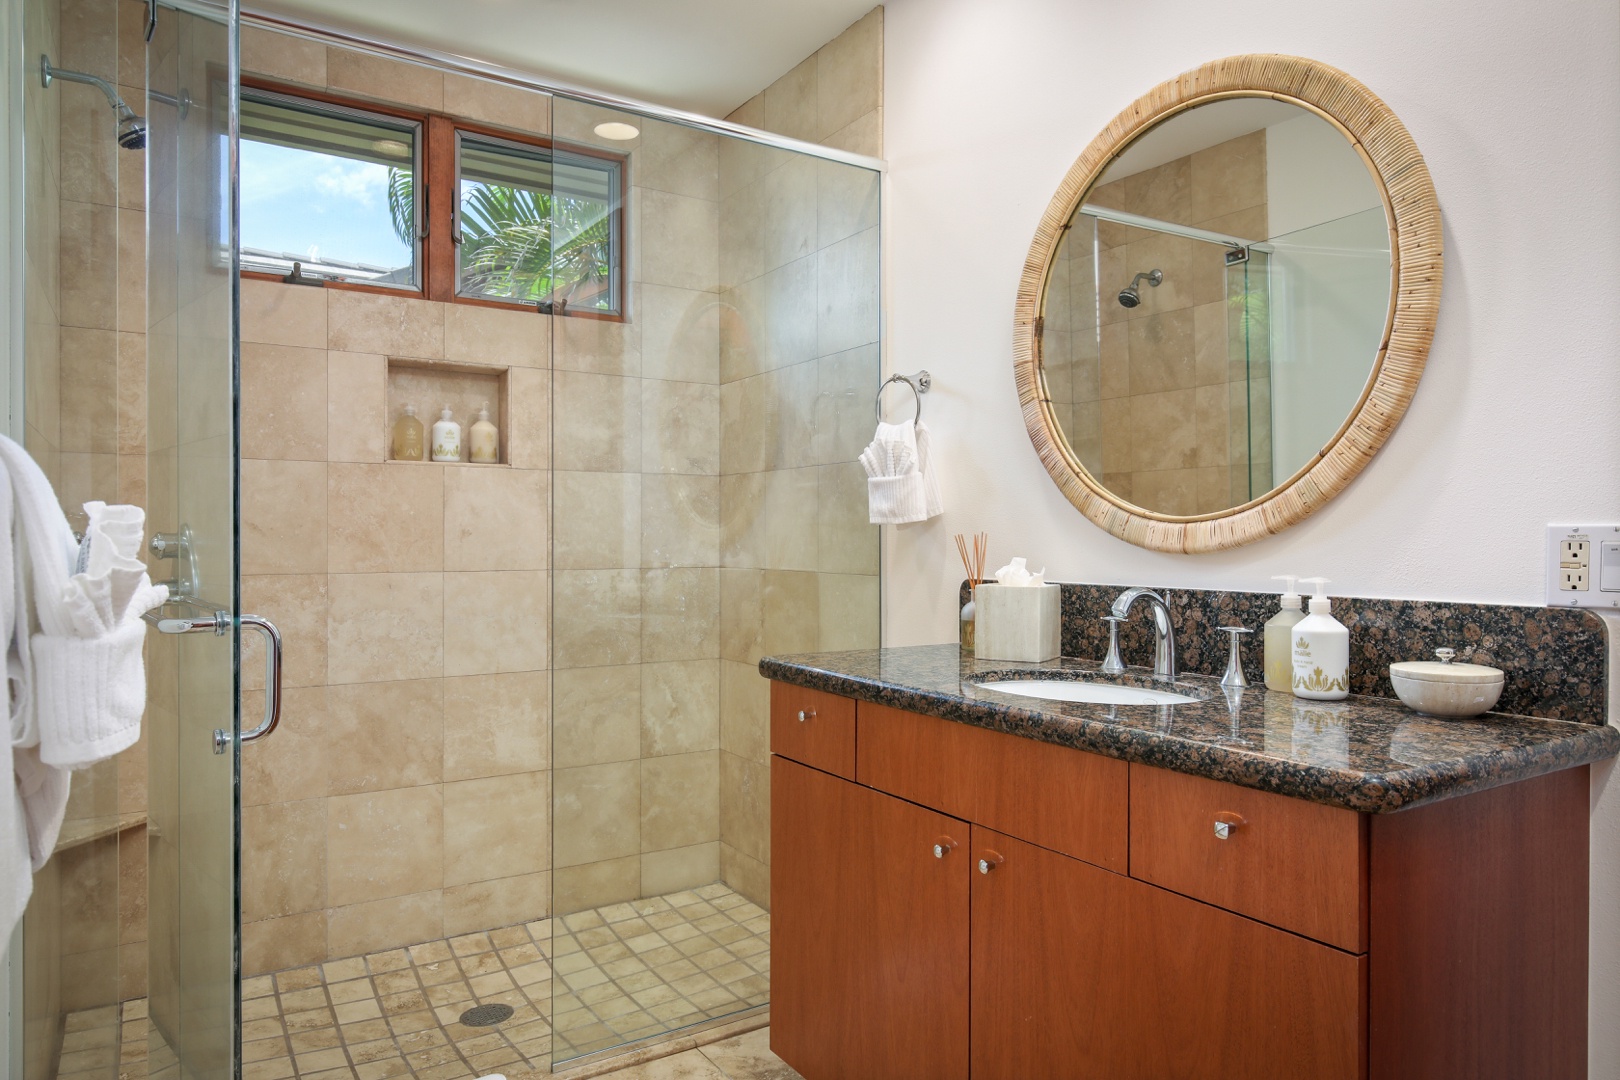 Kailua Kona Vacation Rentals, 4BD Pakui Street (147) Estate Home at Four Seasons Resort at Hualalai - Guest Suite #3’s dedicated full bath with large glass enclosed shower.